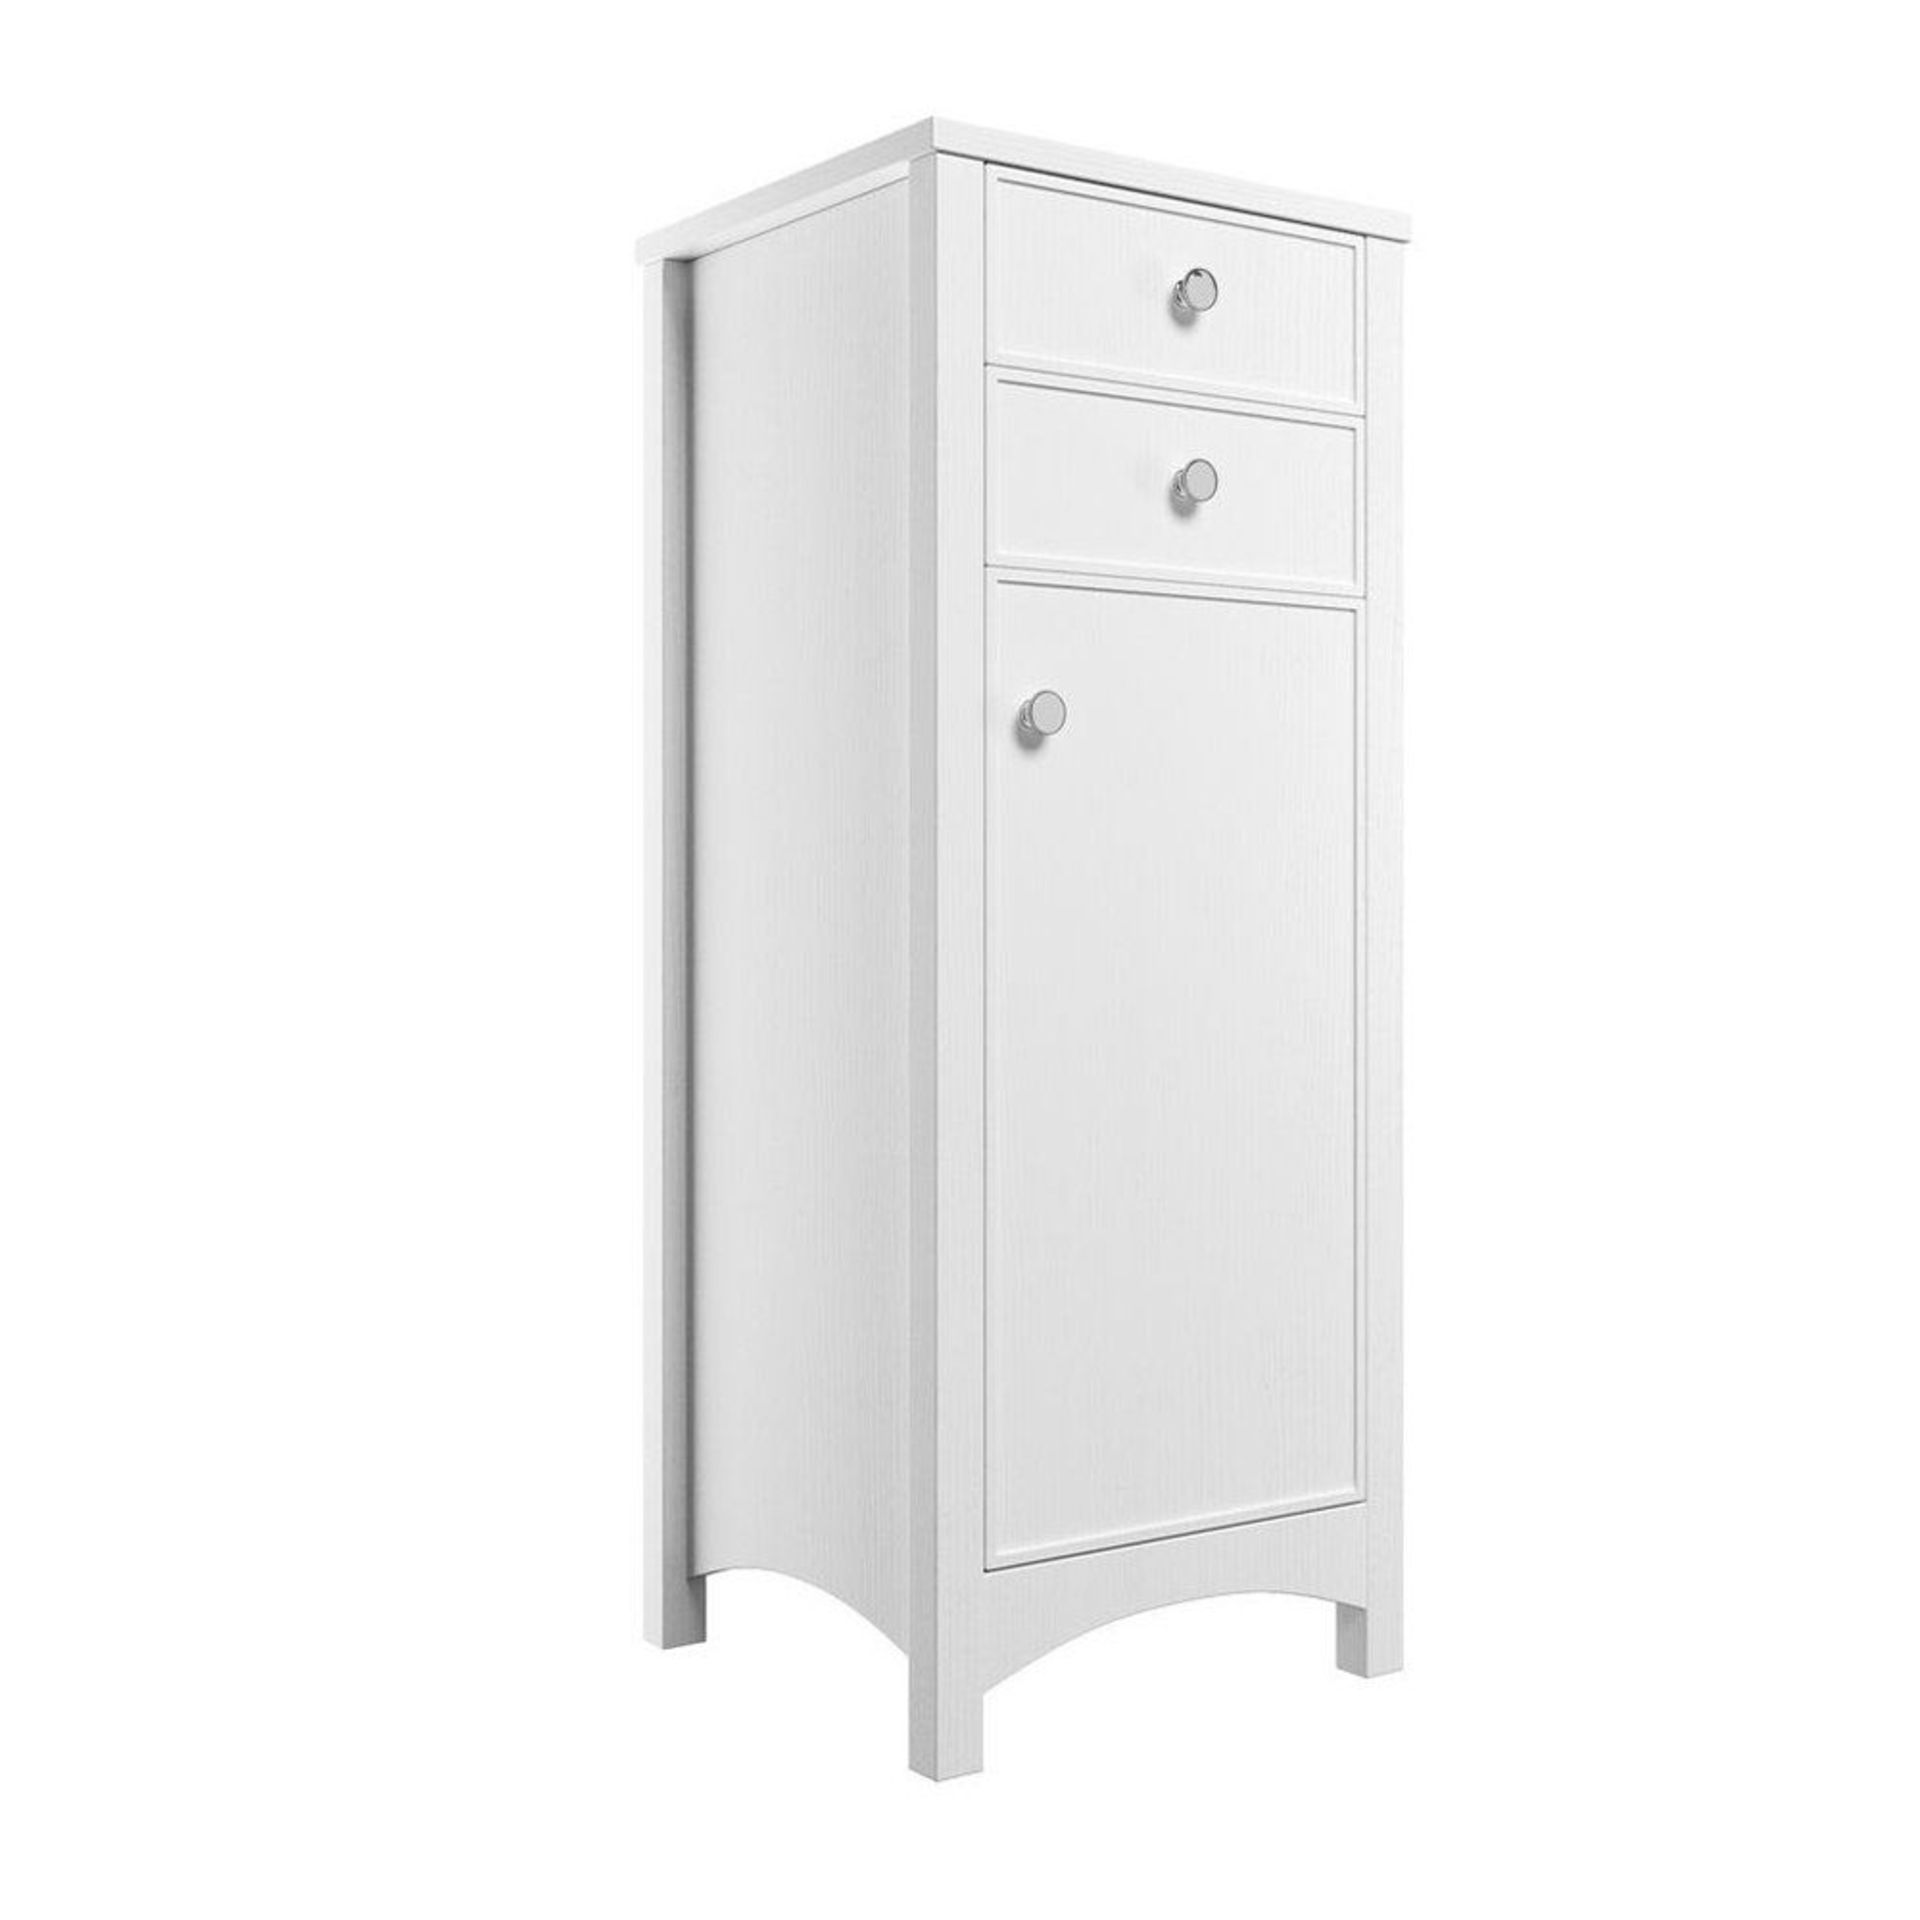 (EE12) New Lucia 465mm Tall Boy Storage Unit - Satin White Ash. RRP £475.00. The textured wood grain